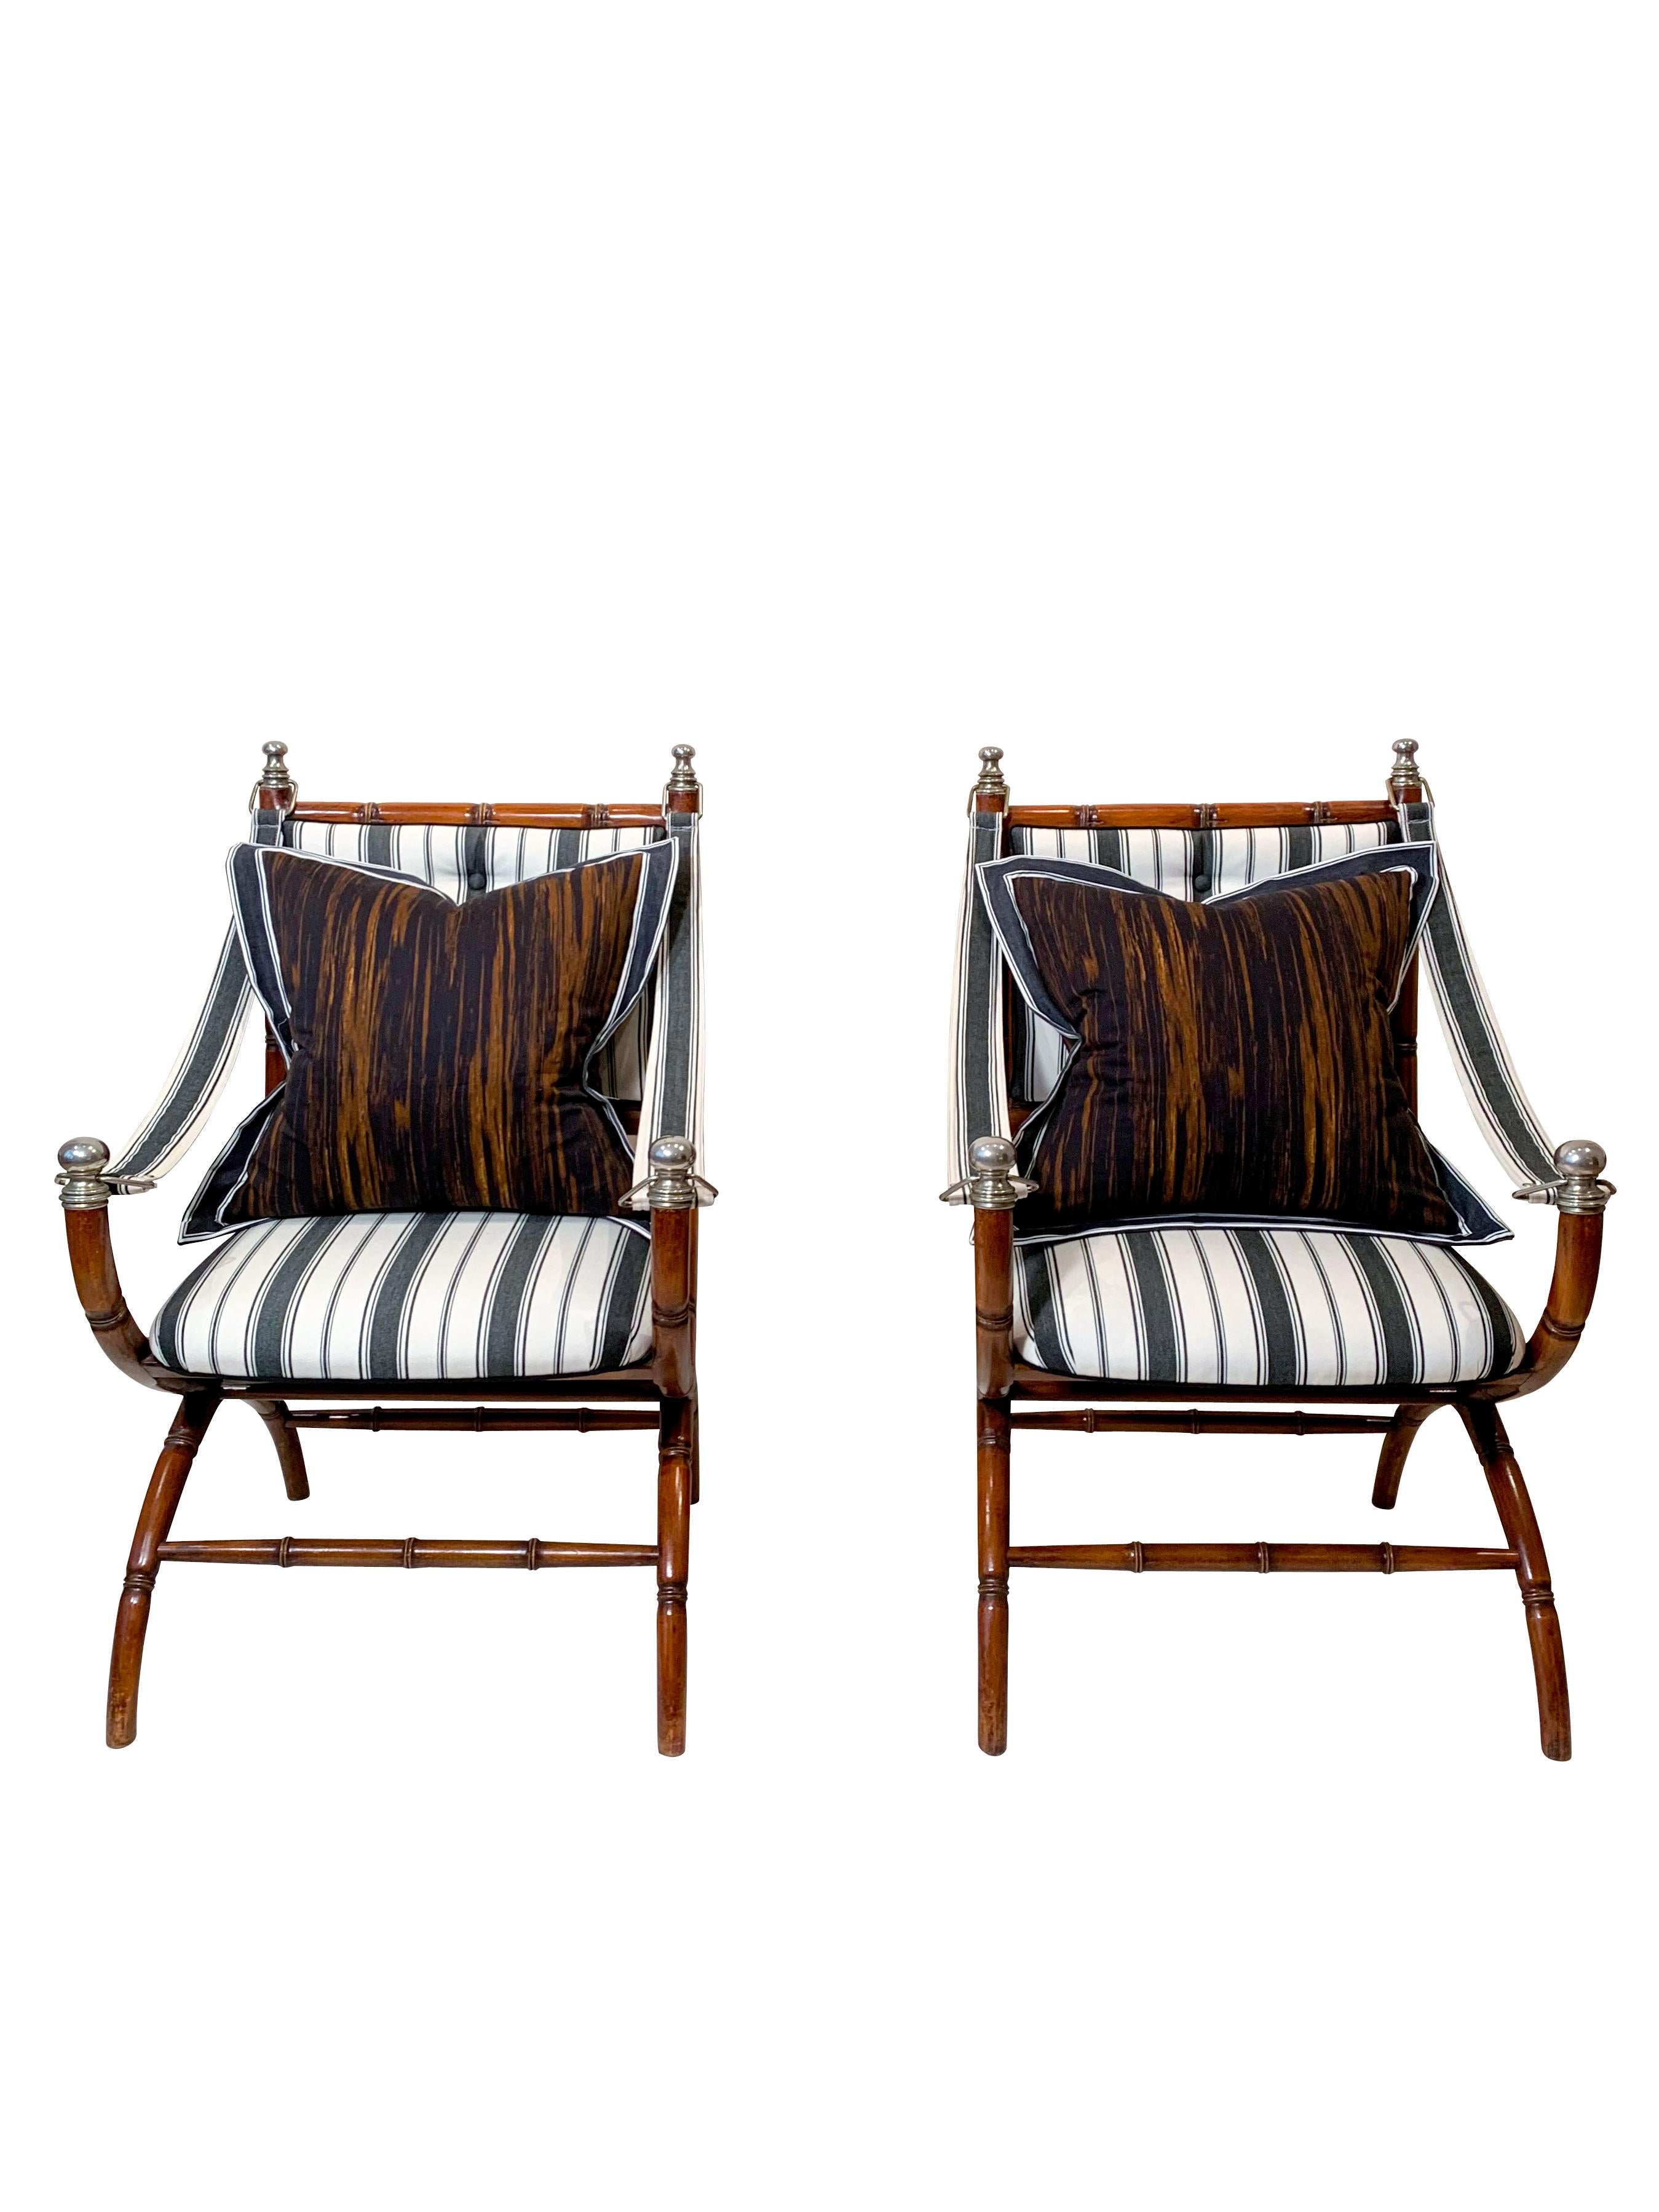 Silver Plate Pair of Faux Bamboo Armchairs on Arched Legs, attributed to Maison Jansen 